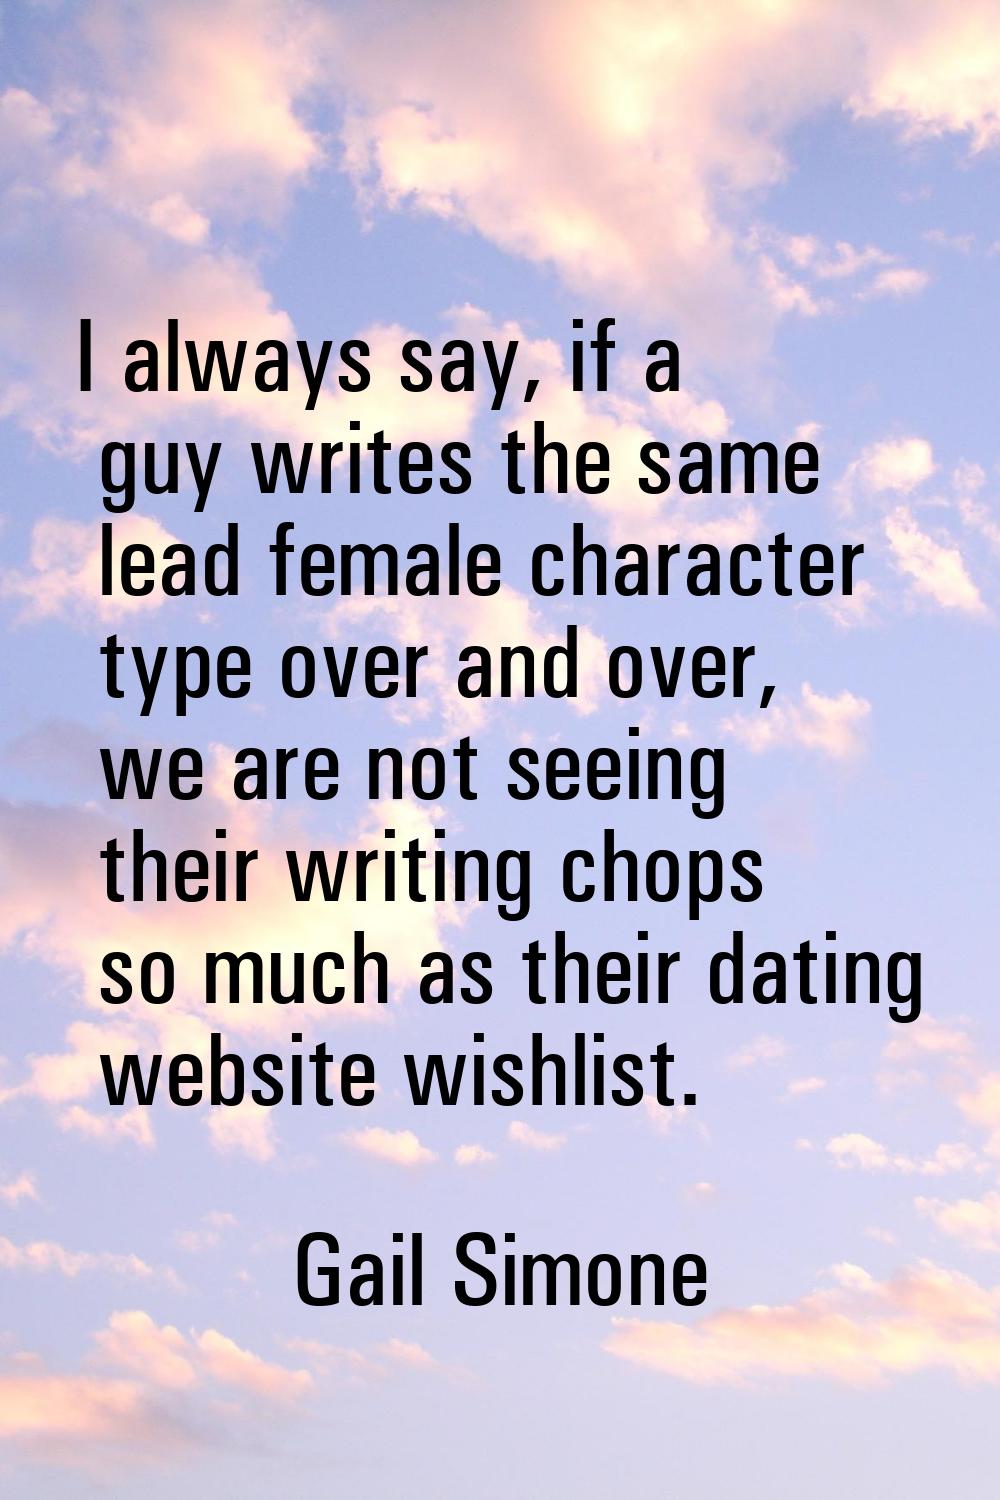 I always say, if a guy writes the same lead female character type over and over, we are not seeing 